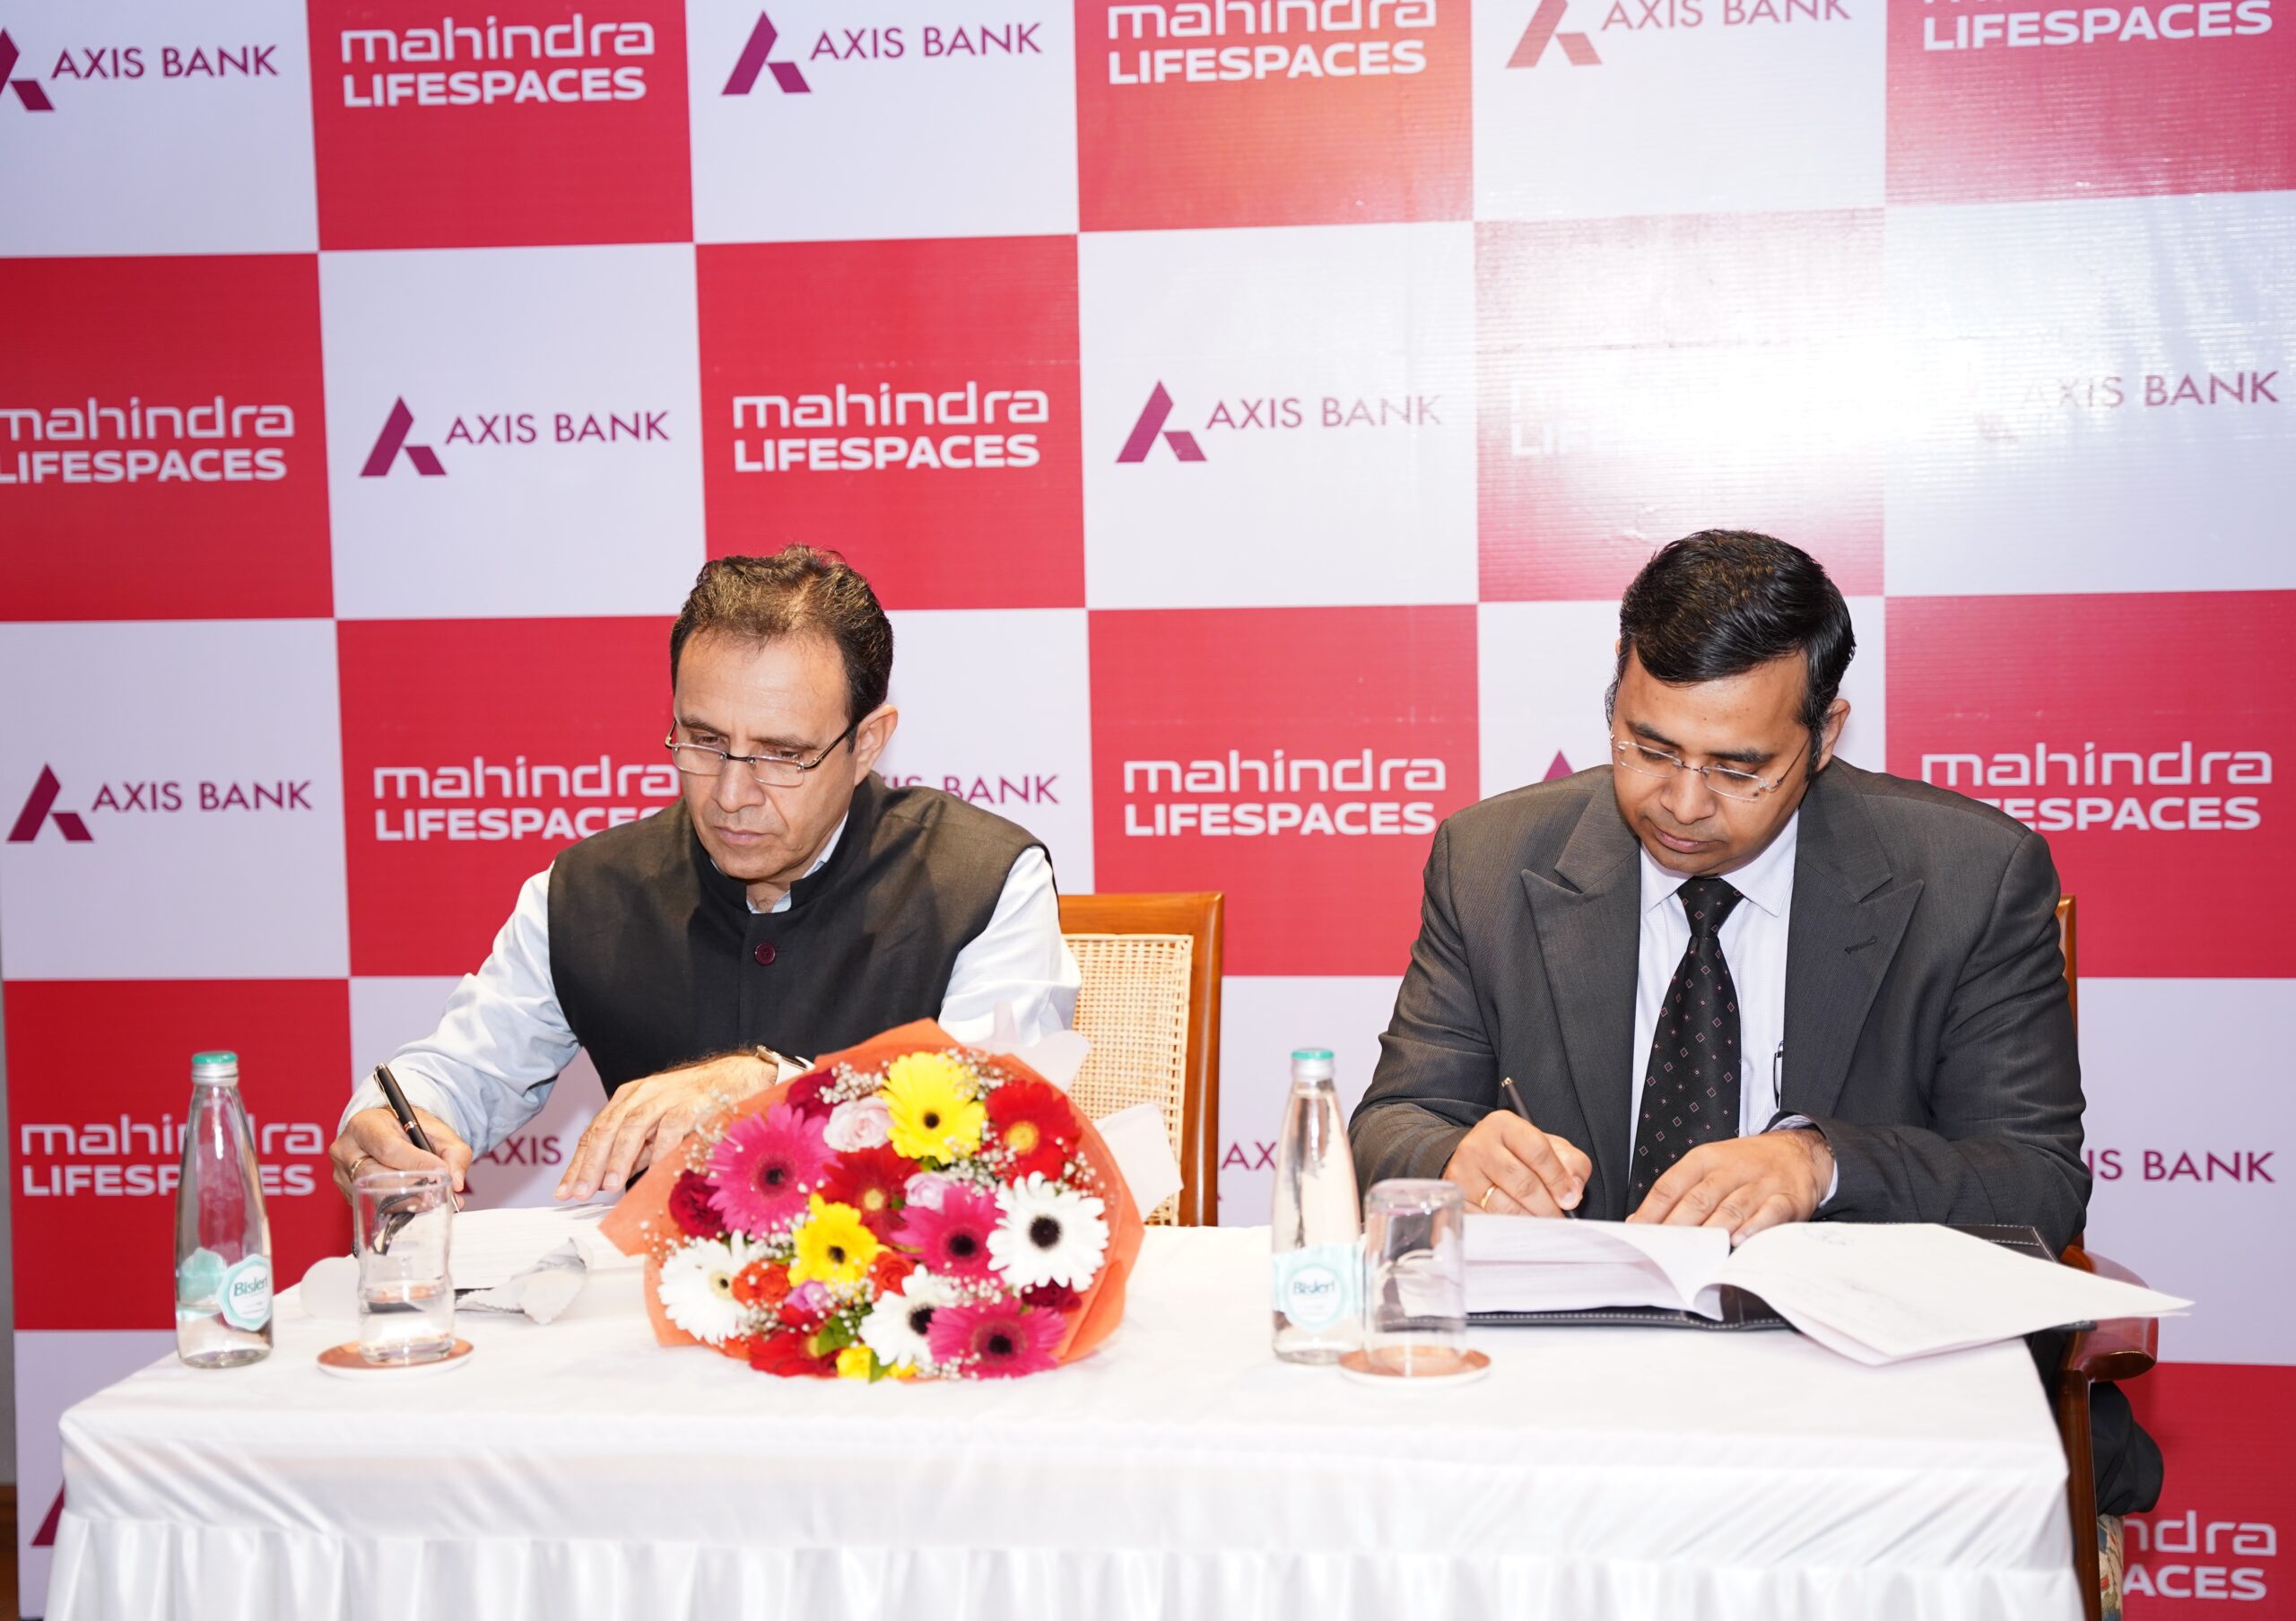 Mahindra Lifespaces and Axis Bank partner to provide Home loans for Green Homes